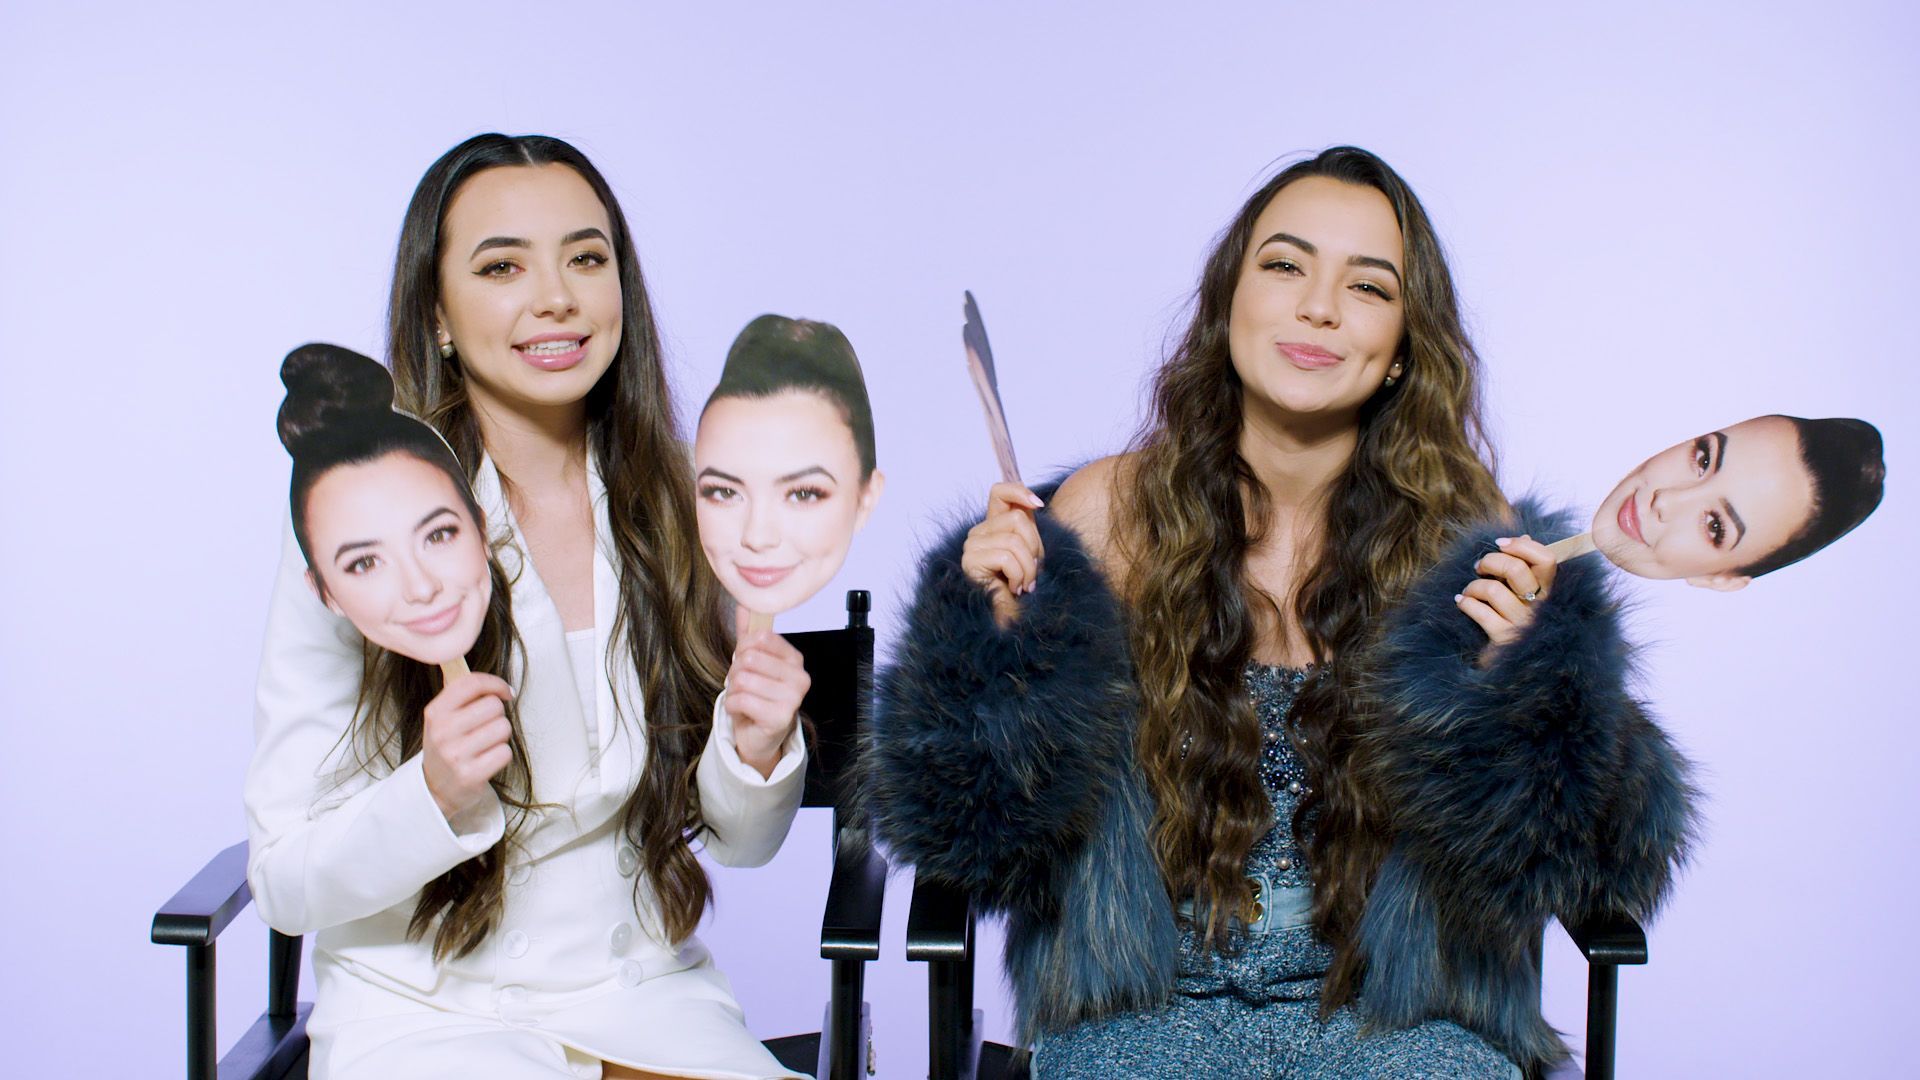 Facts About the Merrell Twins to Know About